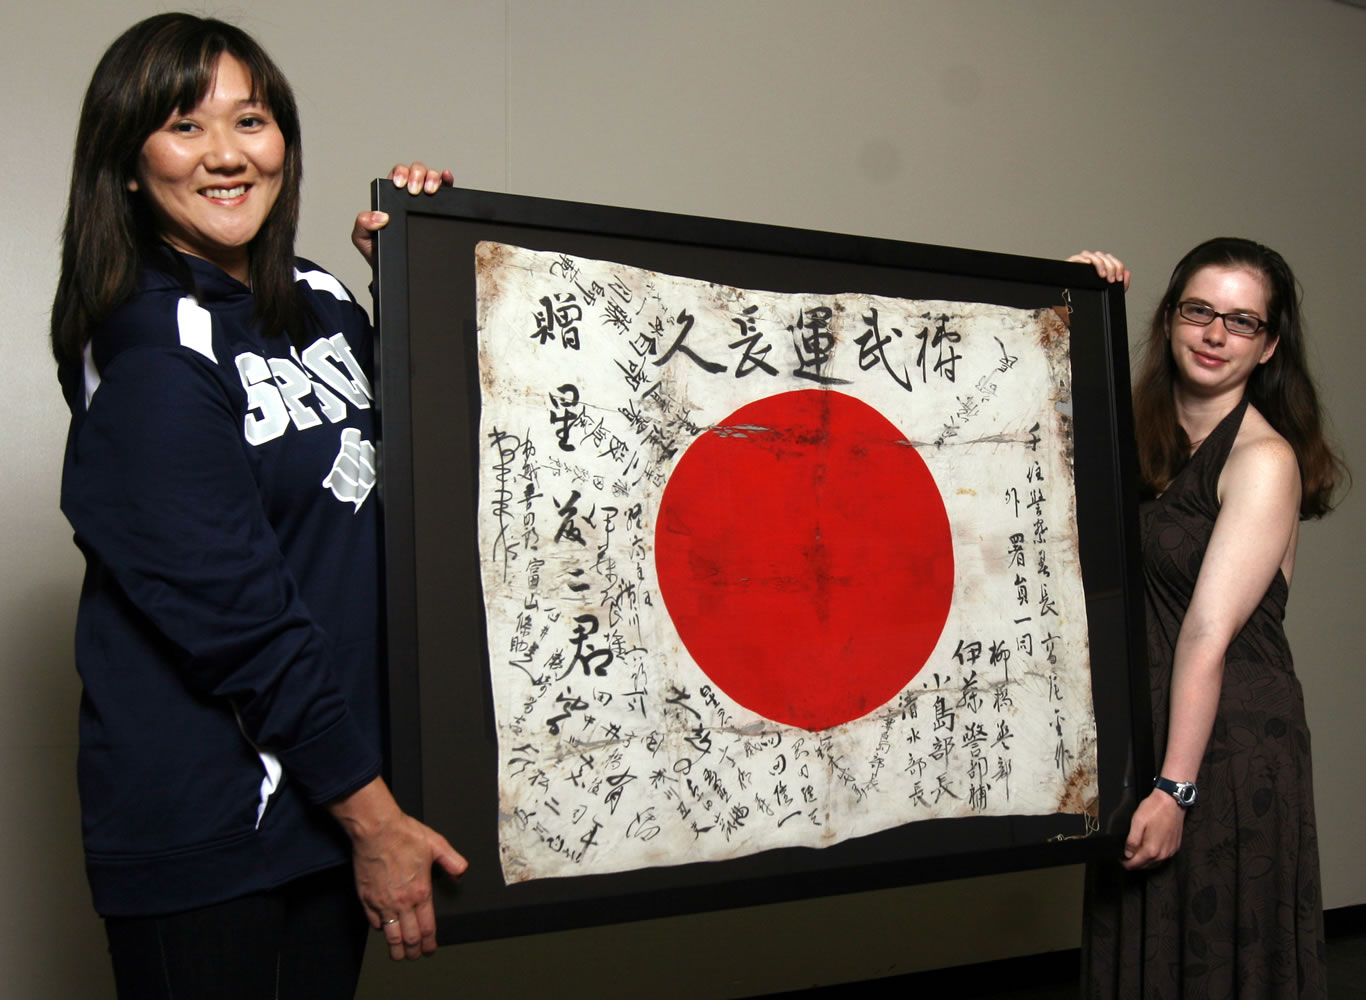 South Puget Sound Community College instructor Aki Suzuki, left, and Jennifer McDougall hold a Japanese flag McDougall's grandfather brought home from World War II.